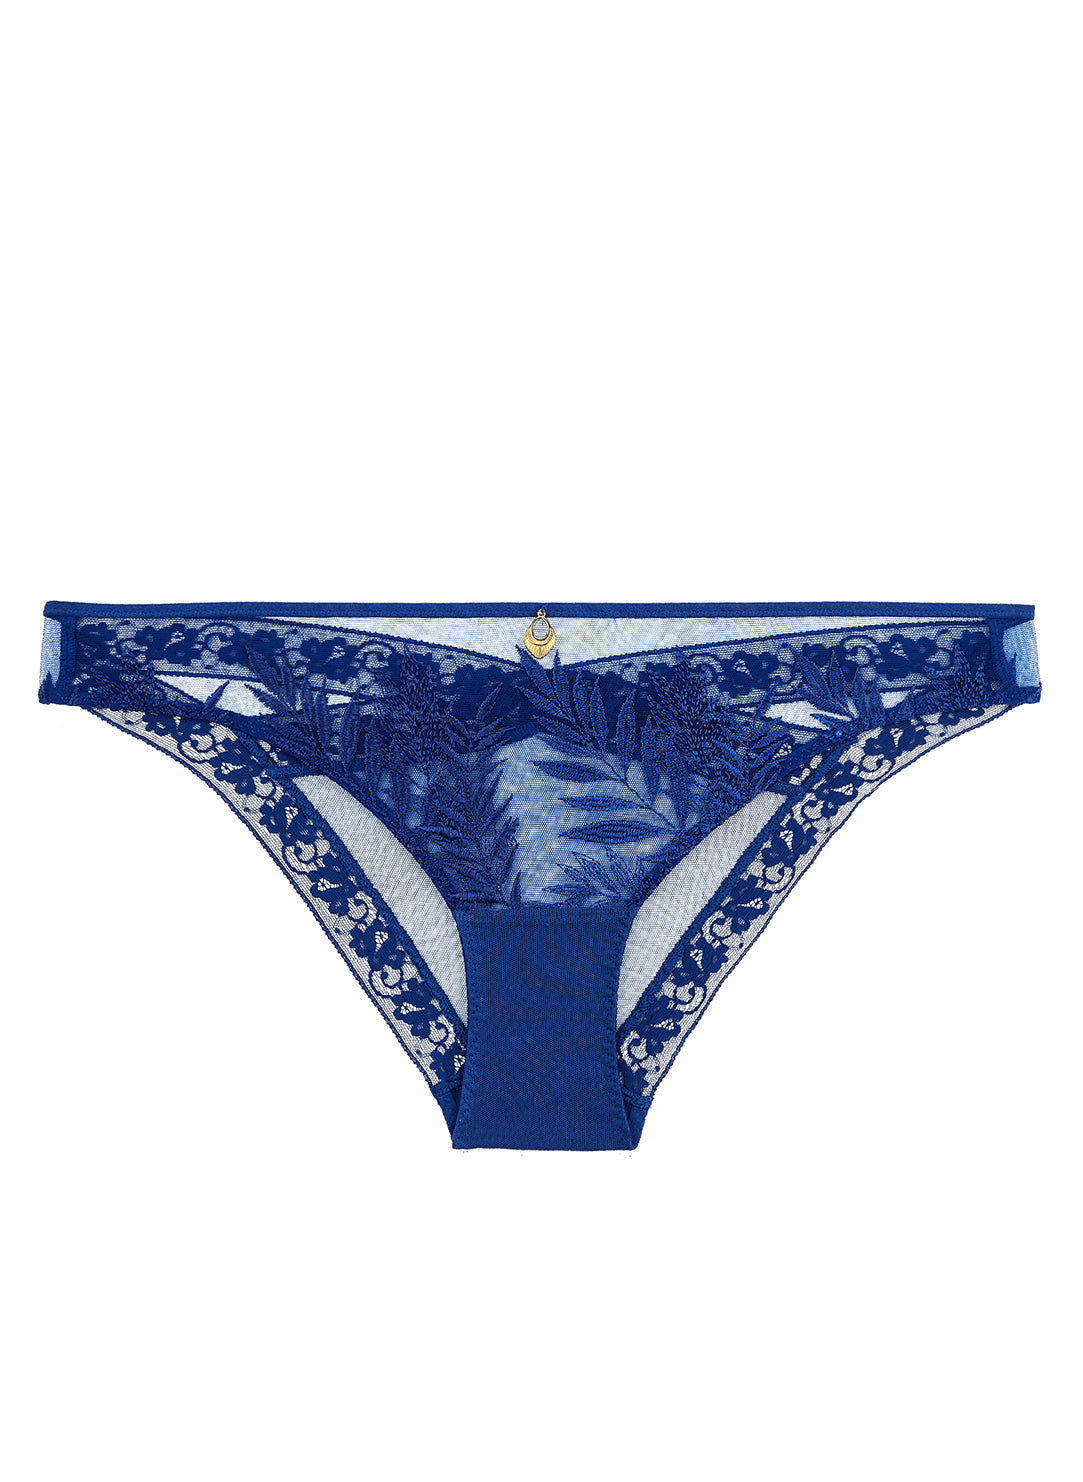 Aubade Parenthese Tropicale Mini Couer Brief in Electric Blue